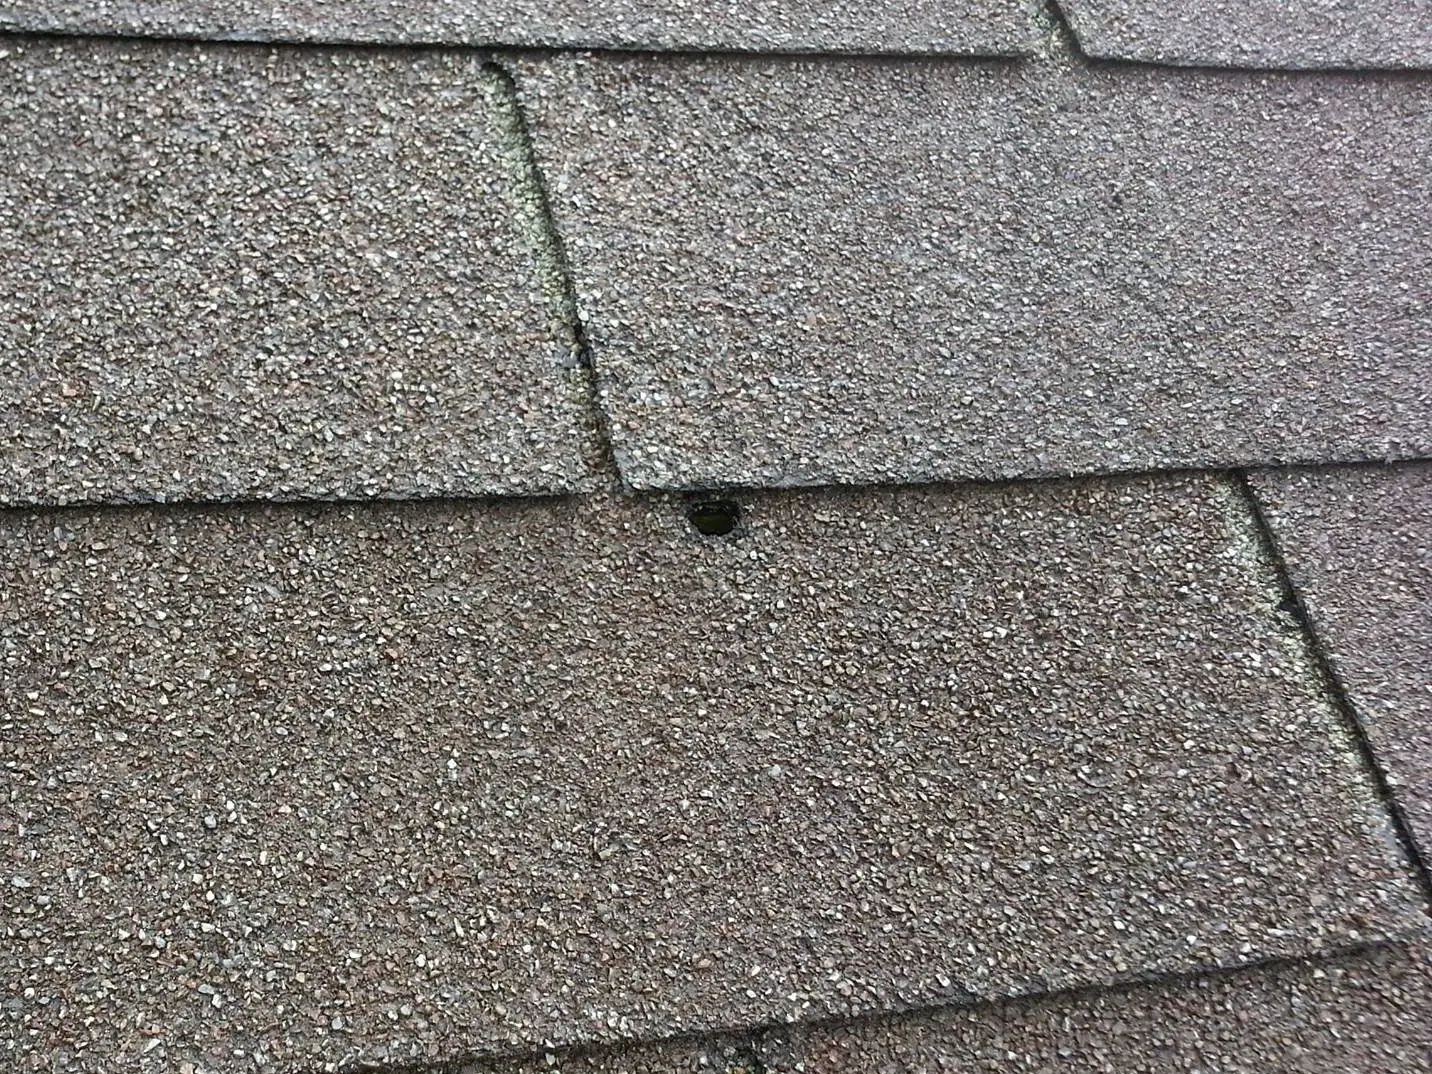 Pro Systems, Inc. Exposed nails can cause roof leaks